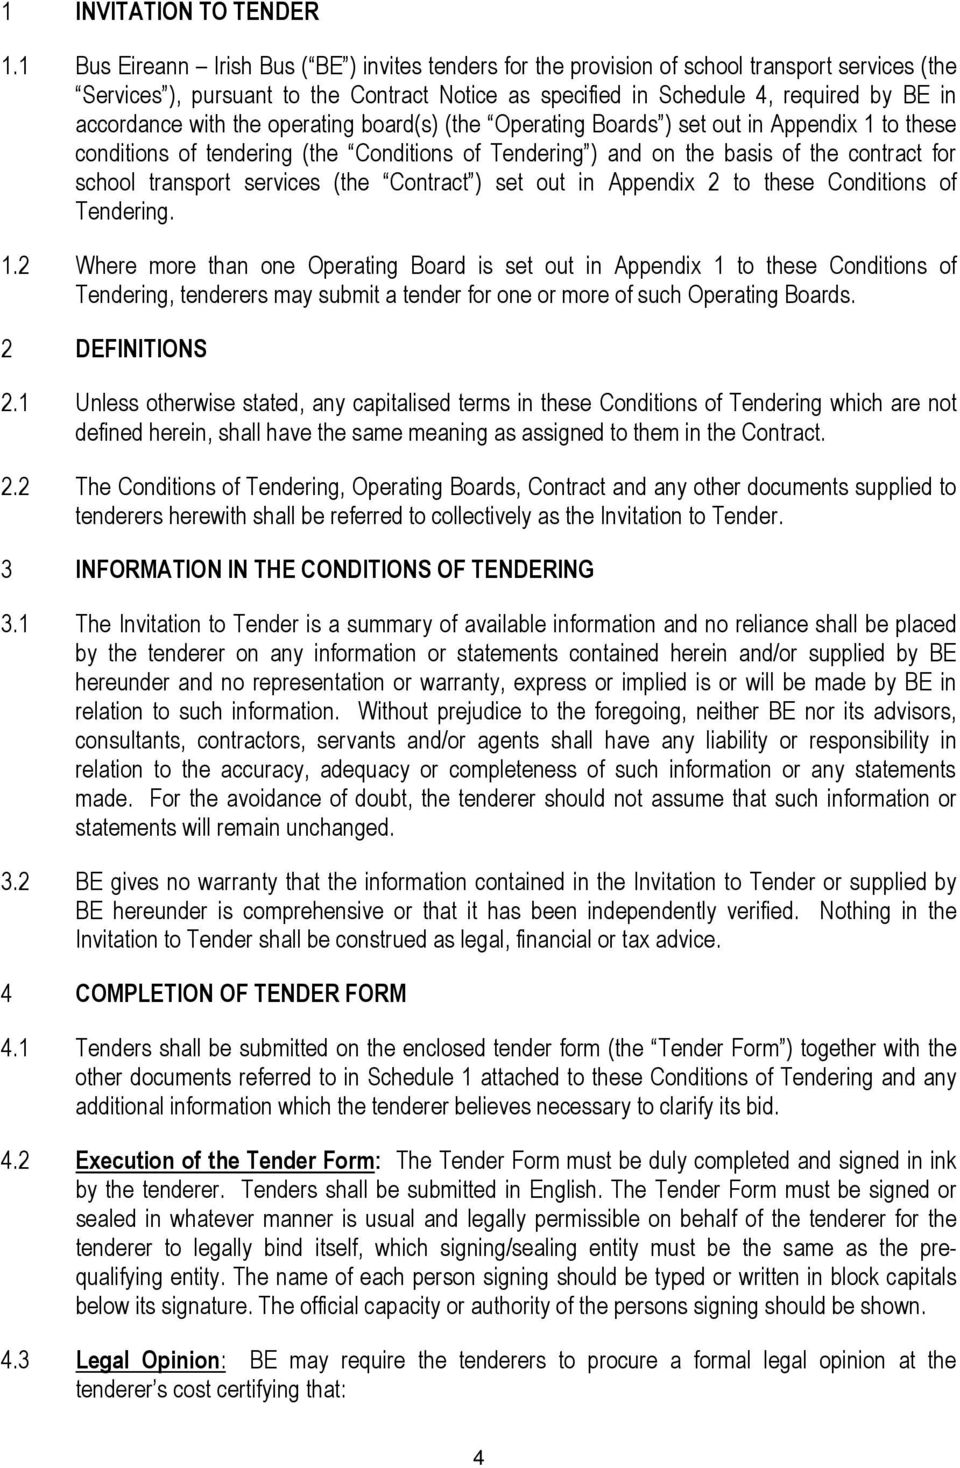 with the operating board(s) (the Operating Boards ) set out in Appendix 1 to these conditions of tendering (the Conditions of Tendering ) and on the basis of the contract for school transport